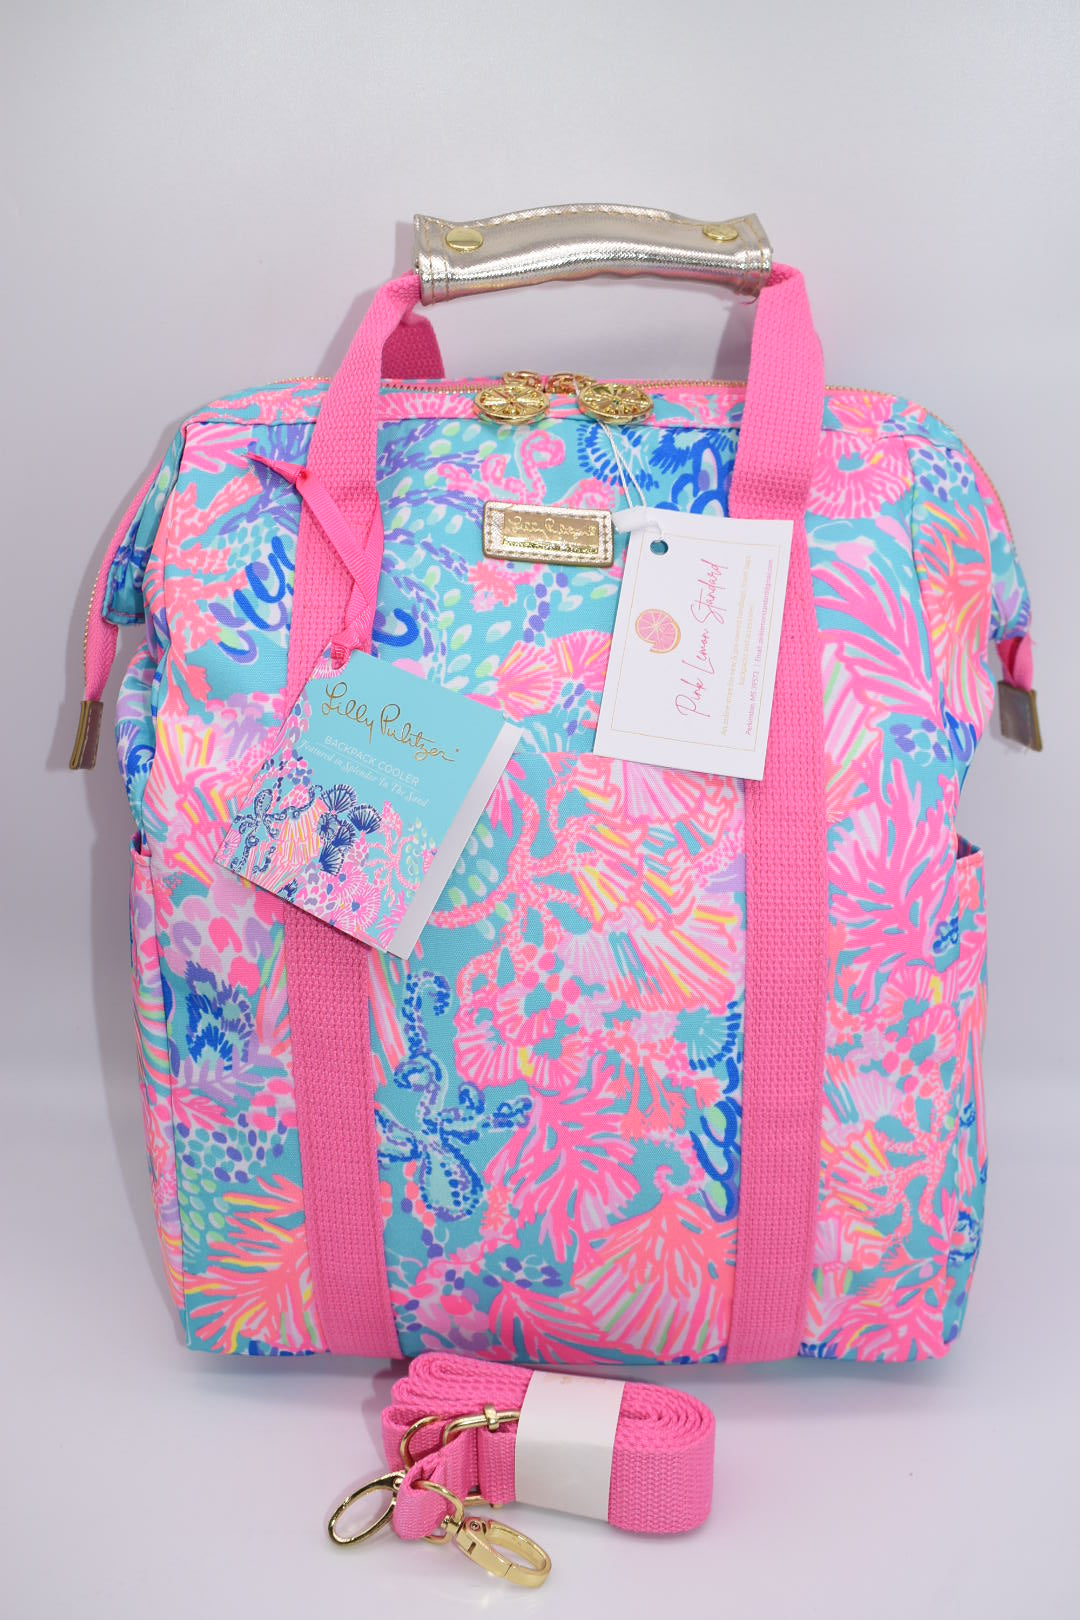 Lilly Pulitzer Backpack Cooler in Splendor in the Sand